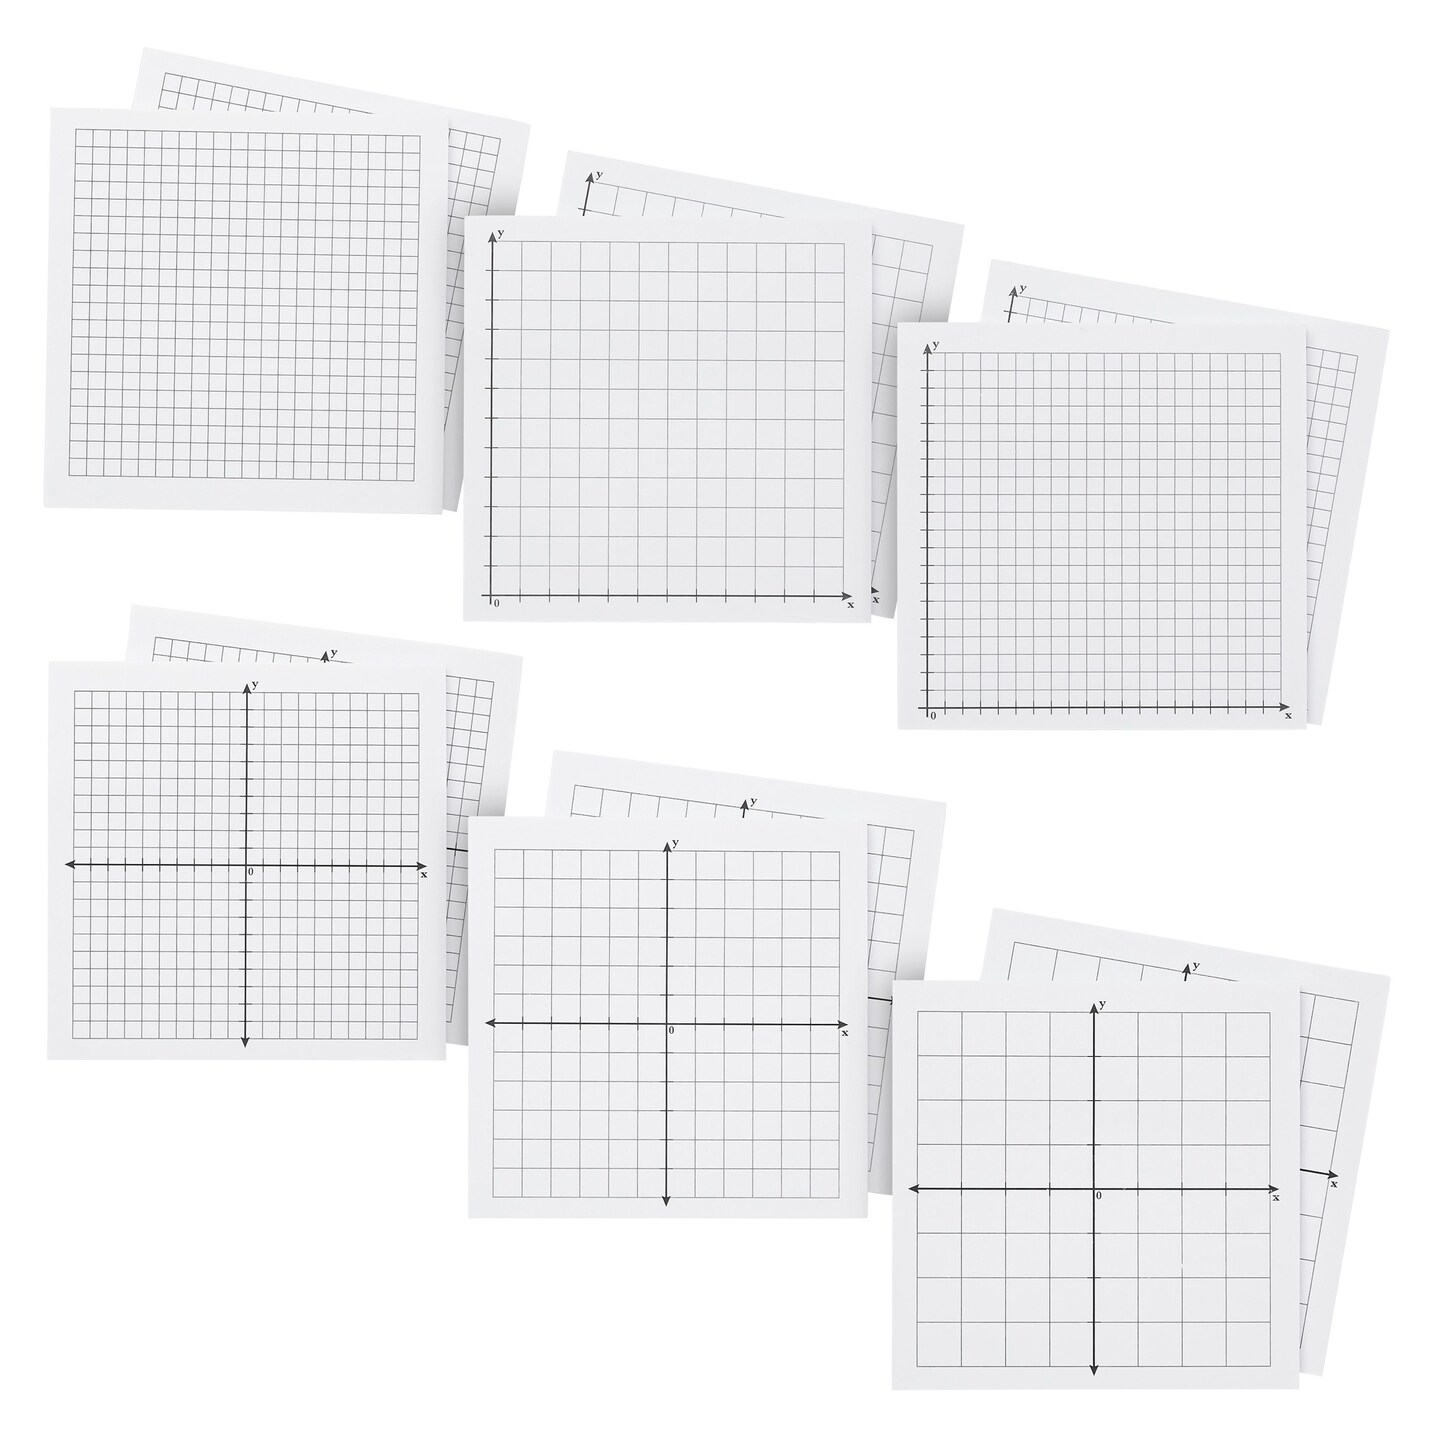  MiniPLOT Graph Paper Pads: 5 Pads of 3x3 inch pre-Printed  Sticky Notes. Each pad Contains 50 Sheets of releasable Adhesive Backed  graphs with NO AXIS. Use for Homework, Taking Notes